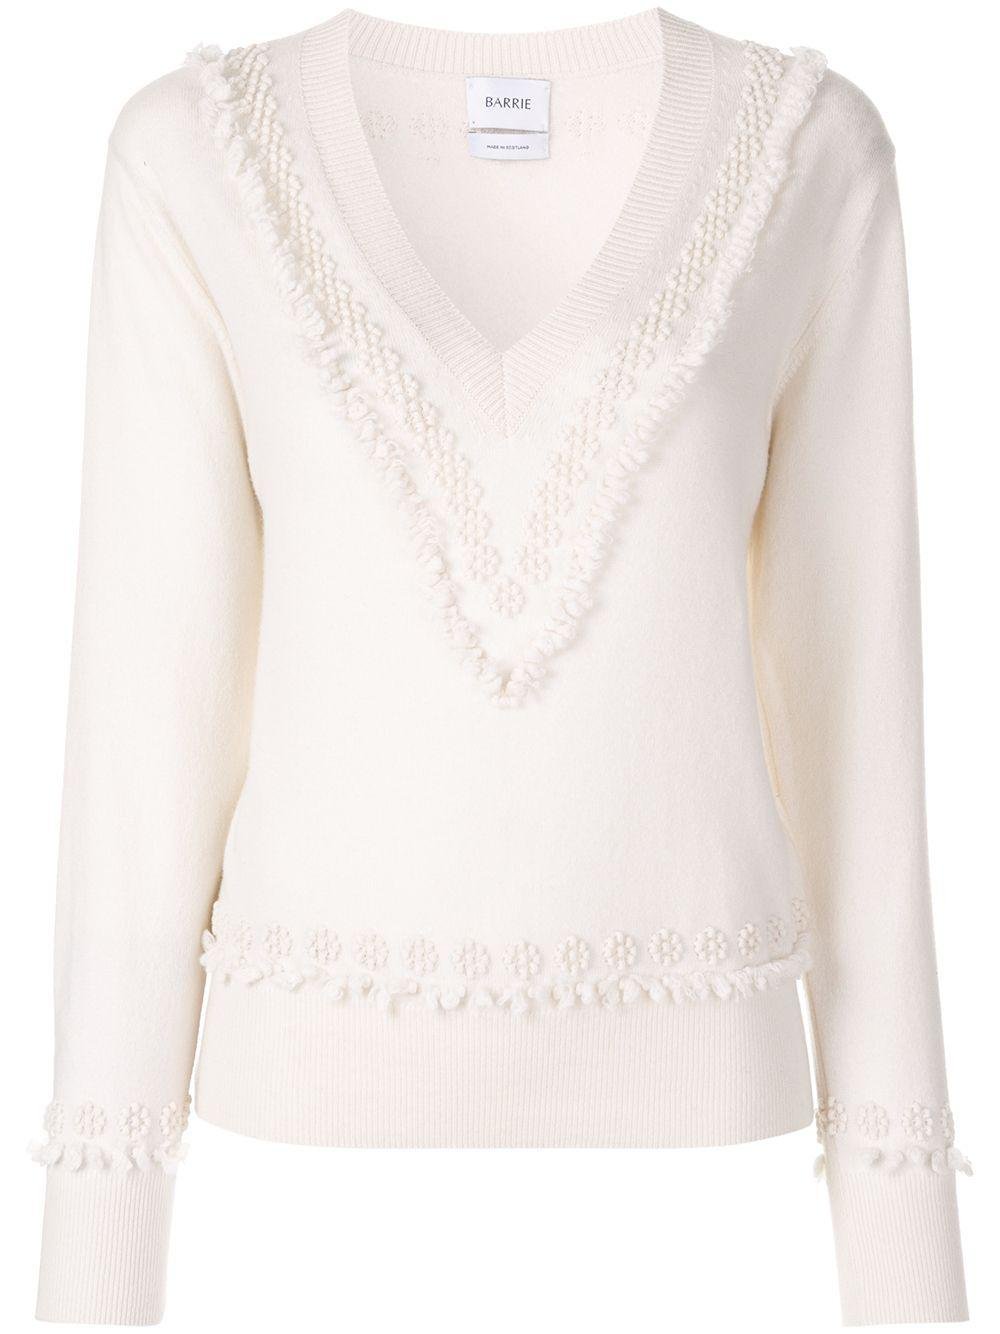 Romantic Timeless cashmere V neck pullover by BARRIE